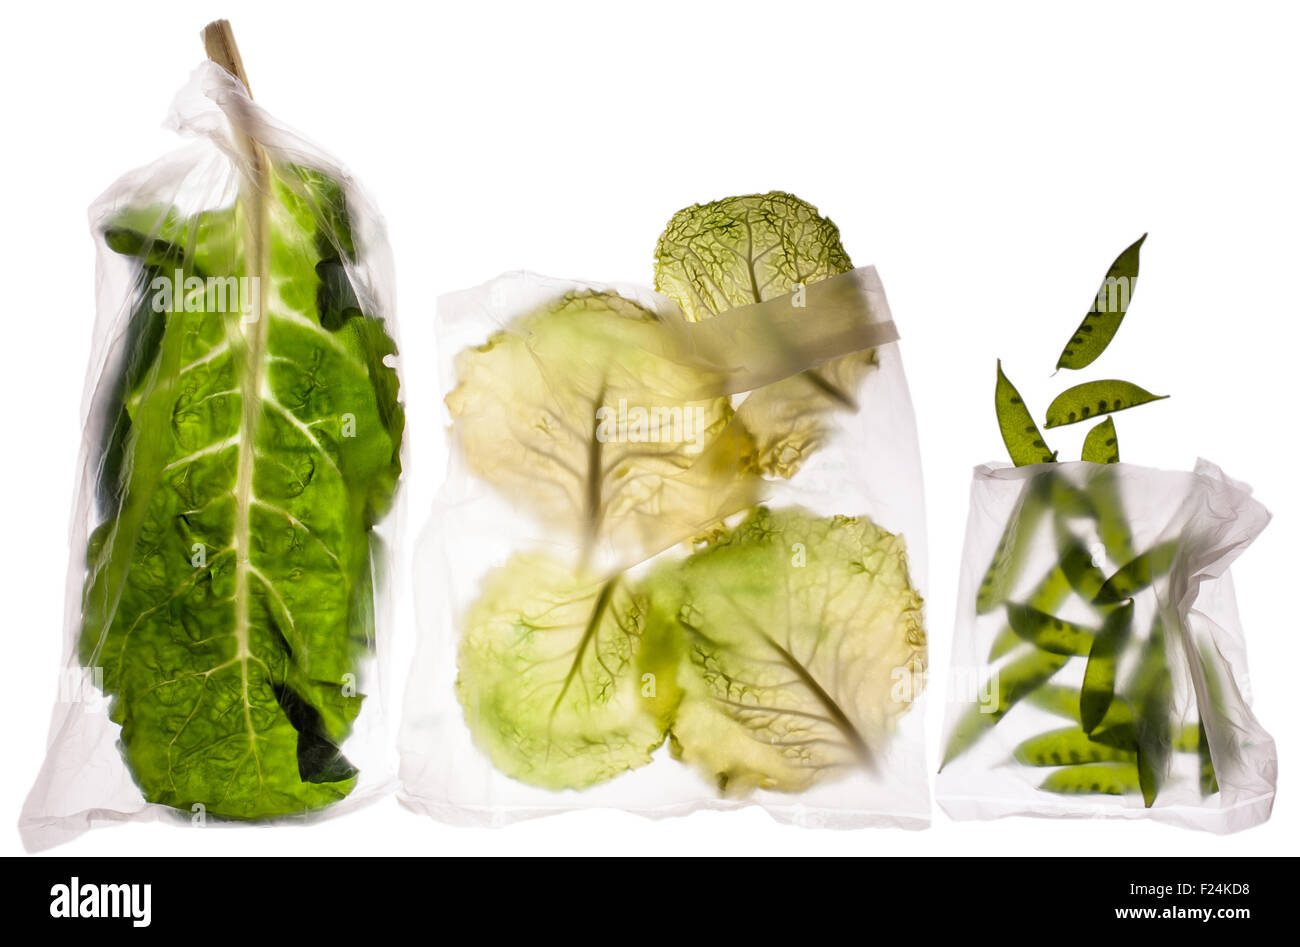 translucent swiss chard, napa cabbage and snow peas in separate clear bags in a row on a light table Stock Photo